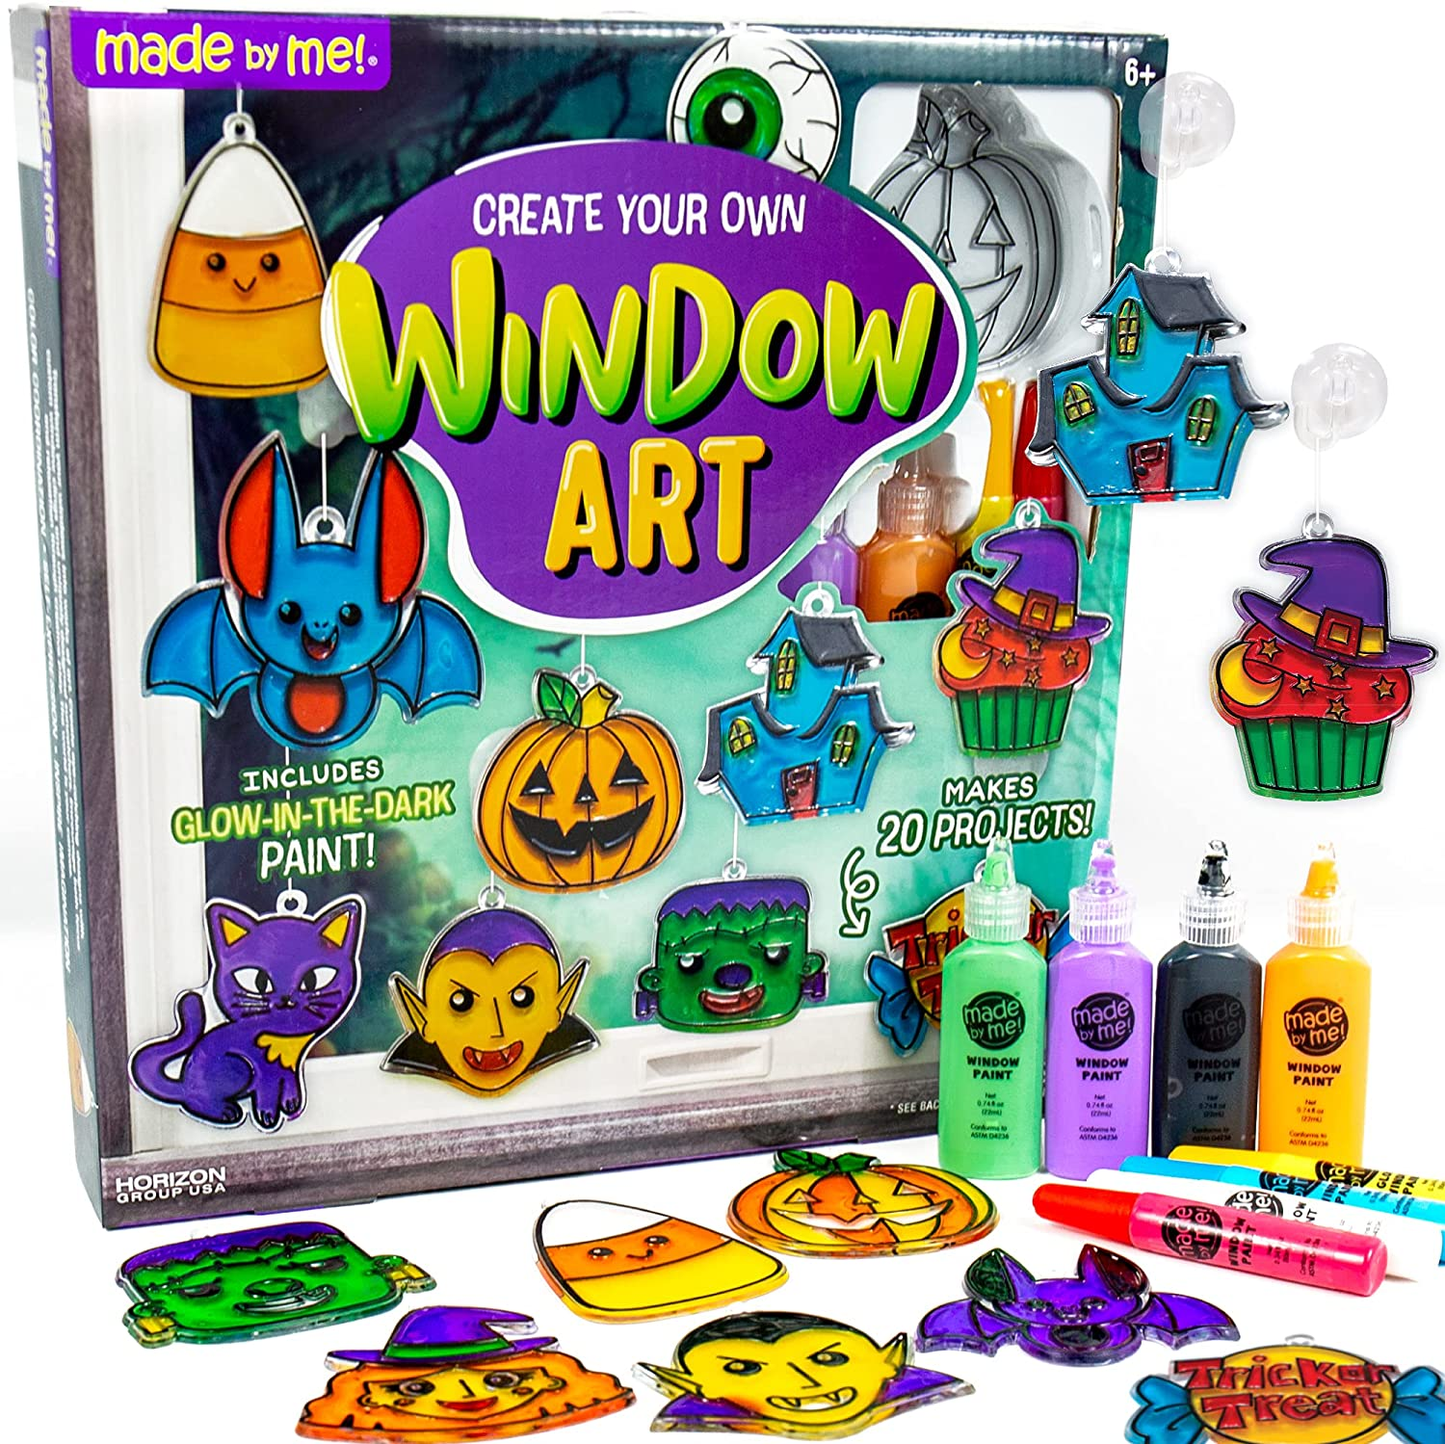 Made by Me Create Your Own Window Art - Paint Your Own Suncatchers - DIY Suncatchers - Arts and Craft Kits for Kids Ages 6, 7, 8, 9